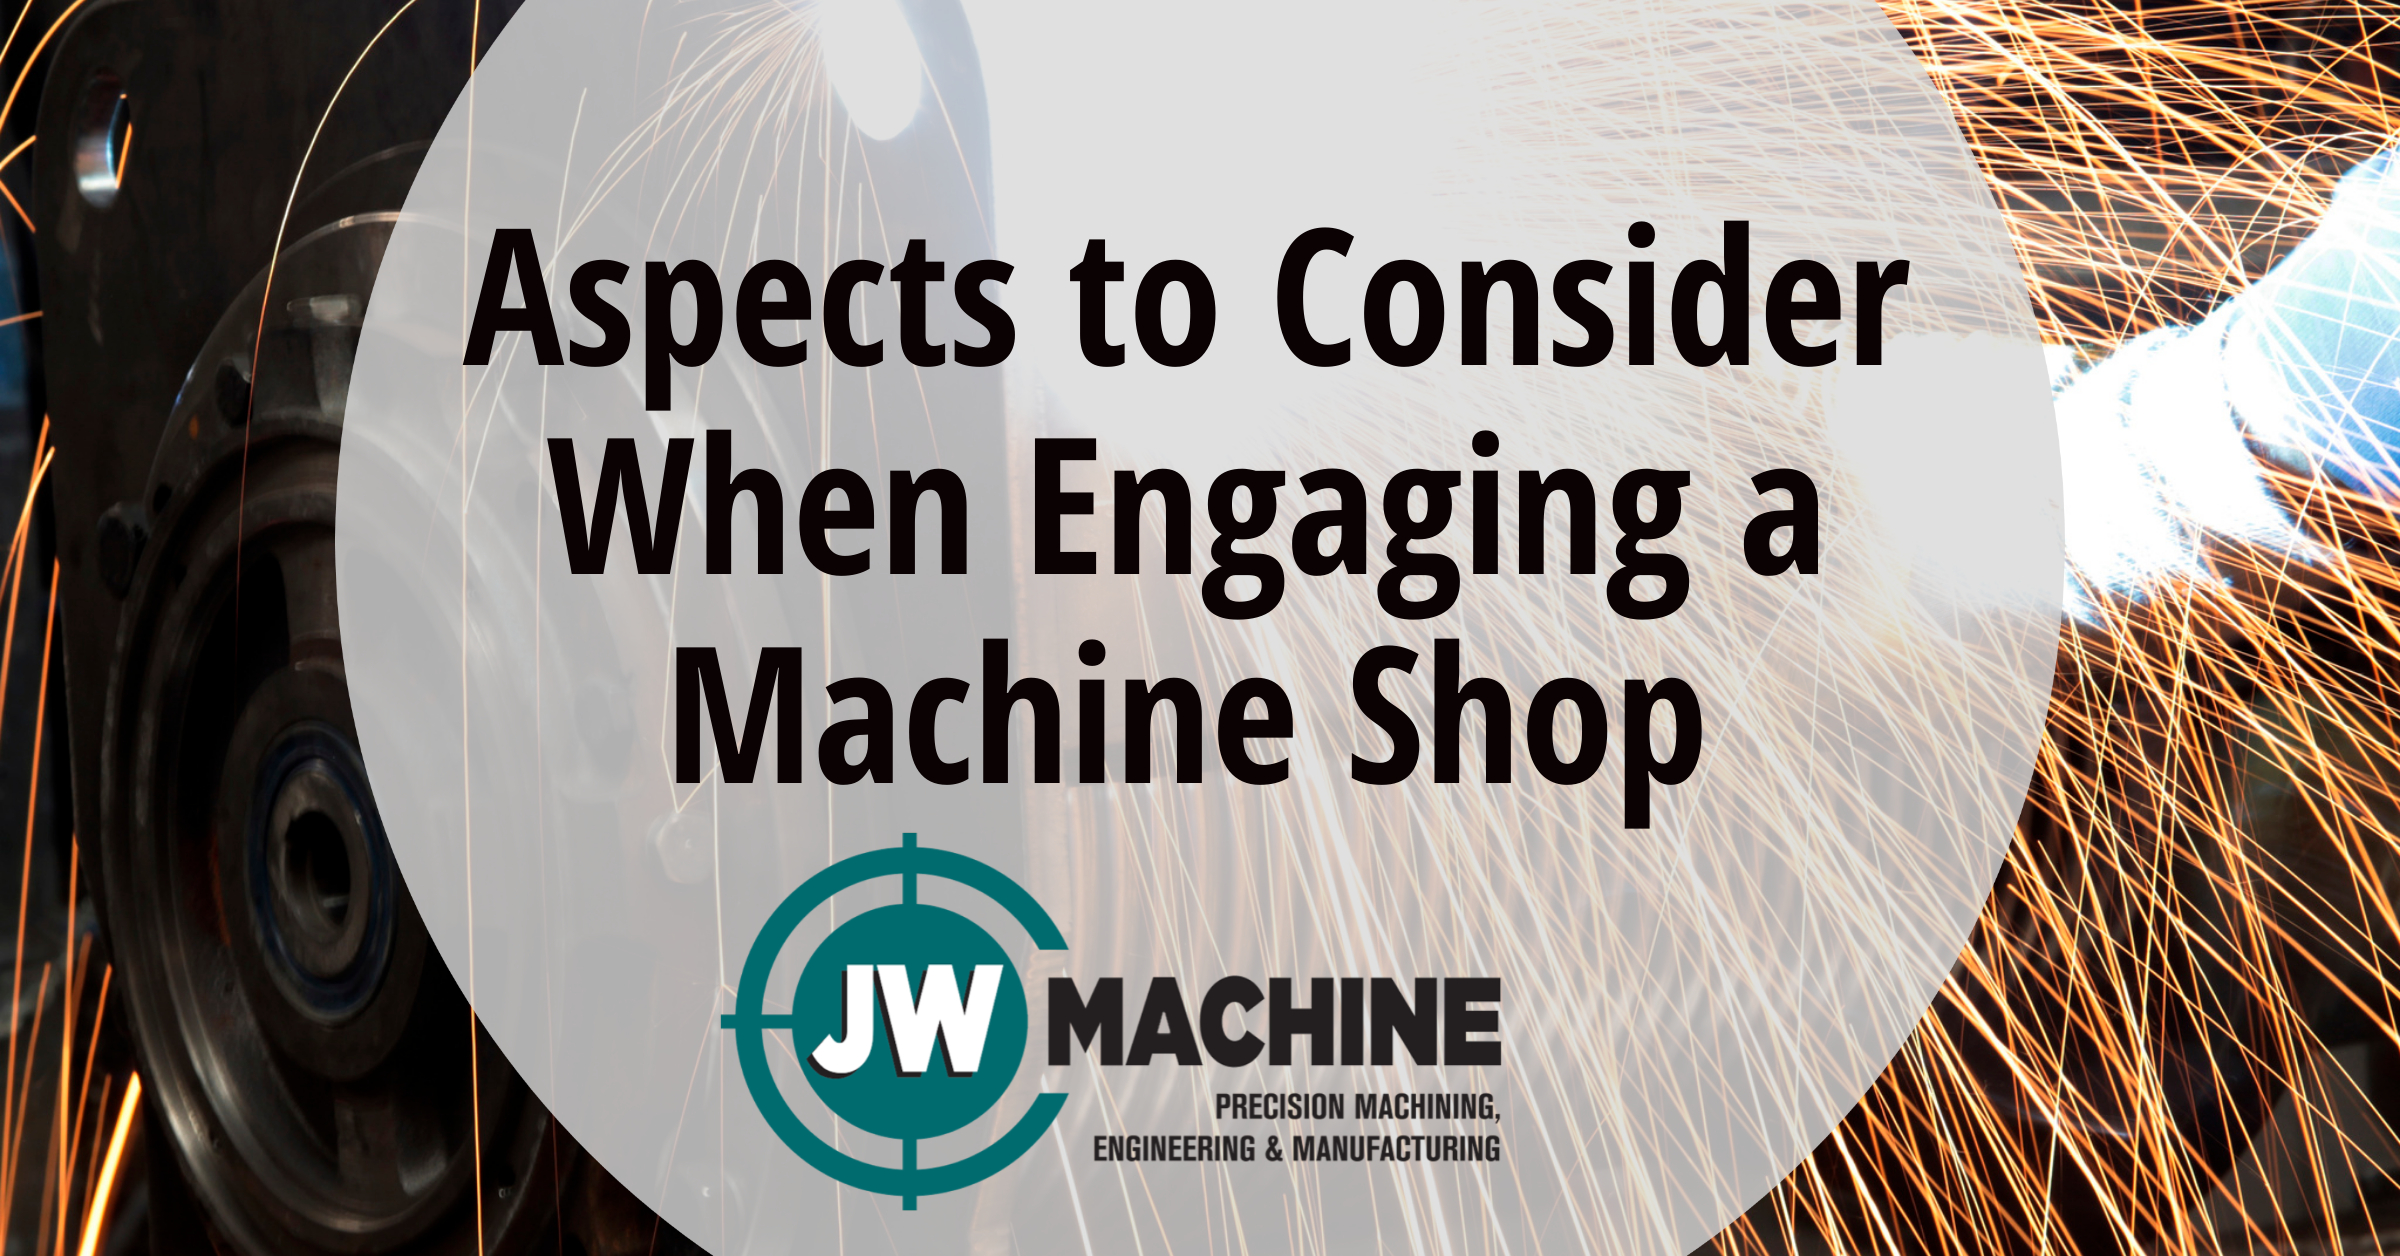 Aspects to Consider When Engaging a Machine Shop